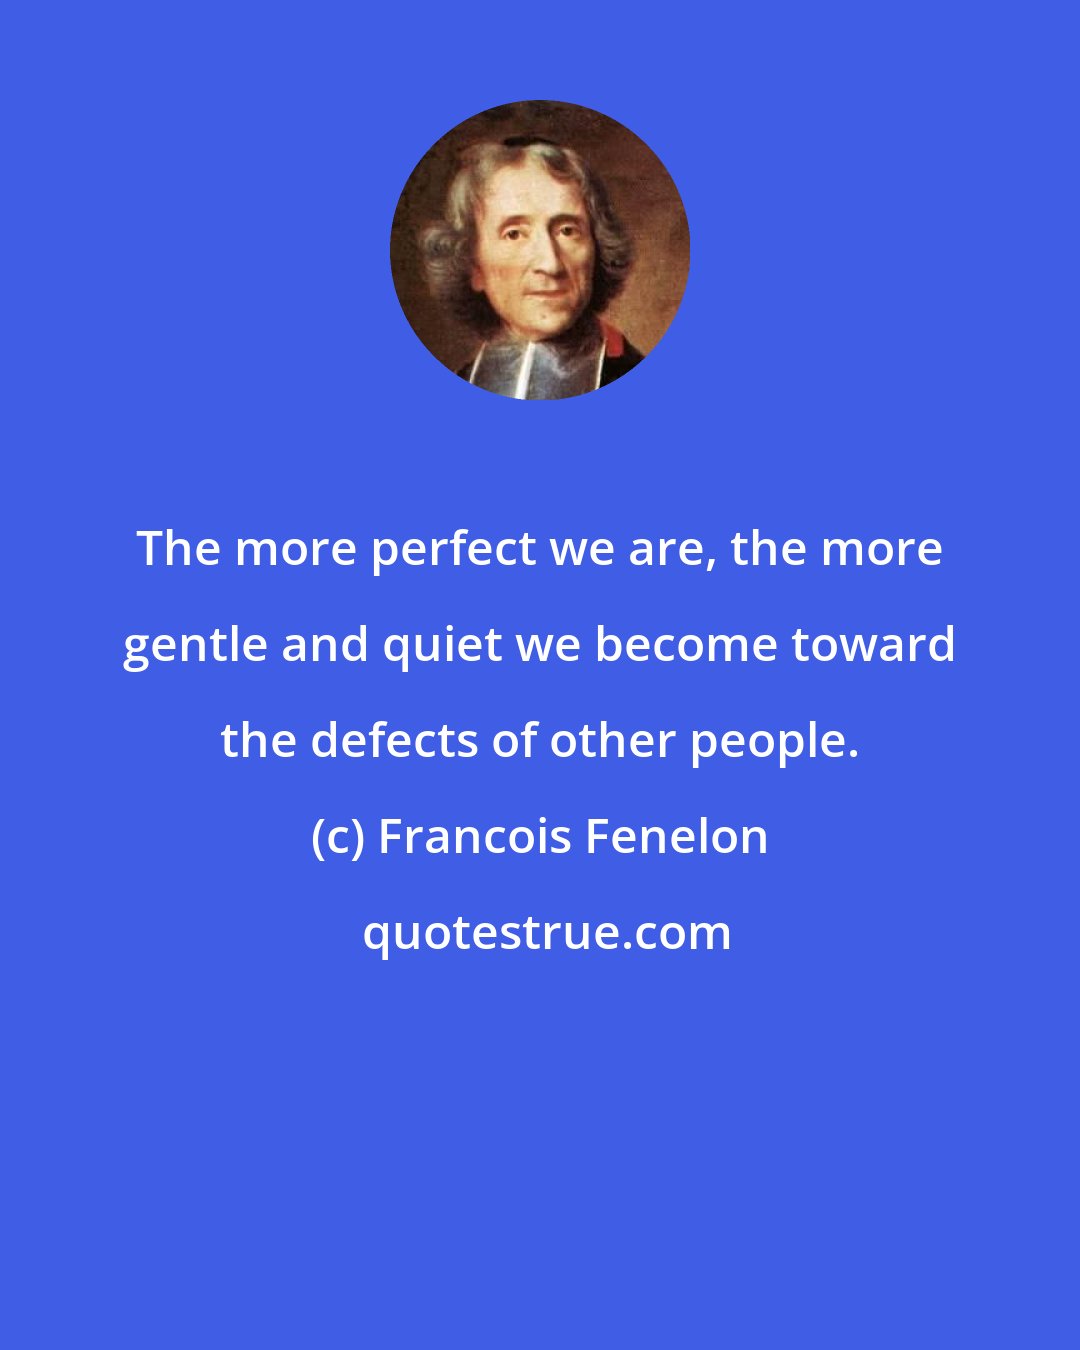 Francois Fenelon: The more perfect we are, the more gentle and quiet we become toward the defects of other people.